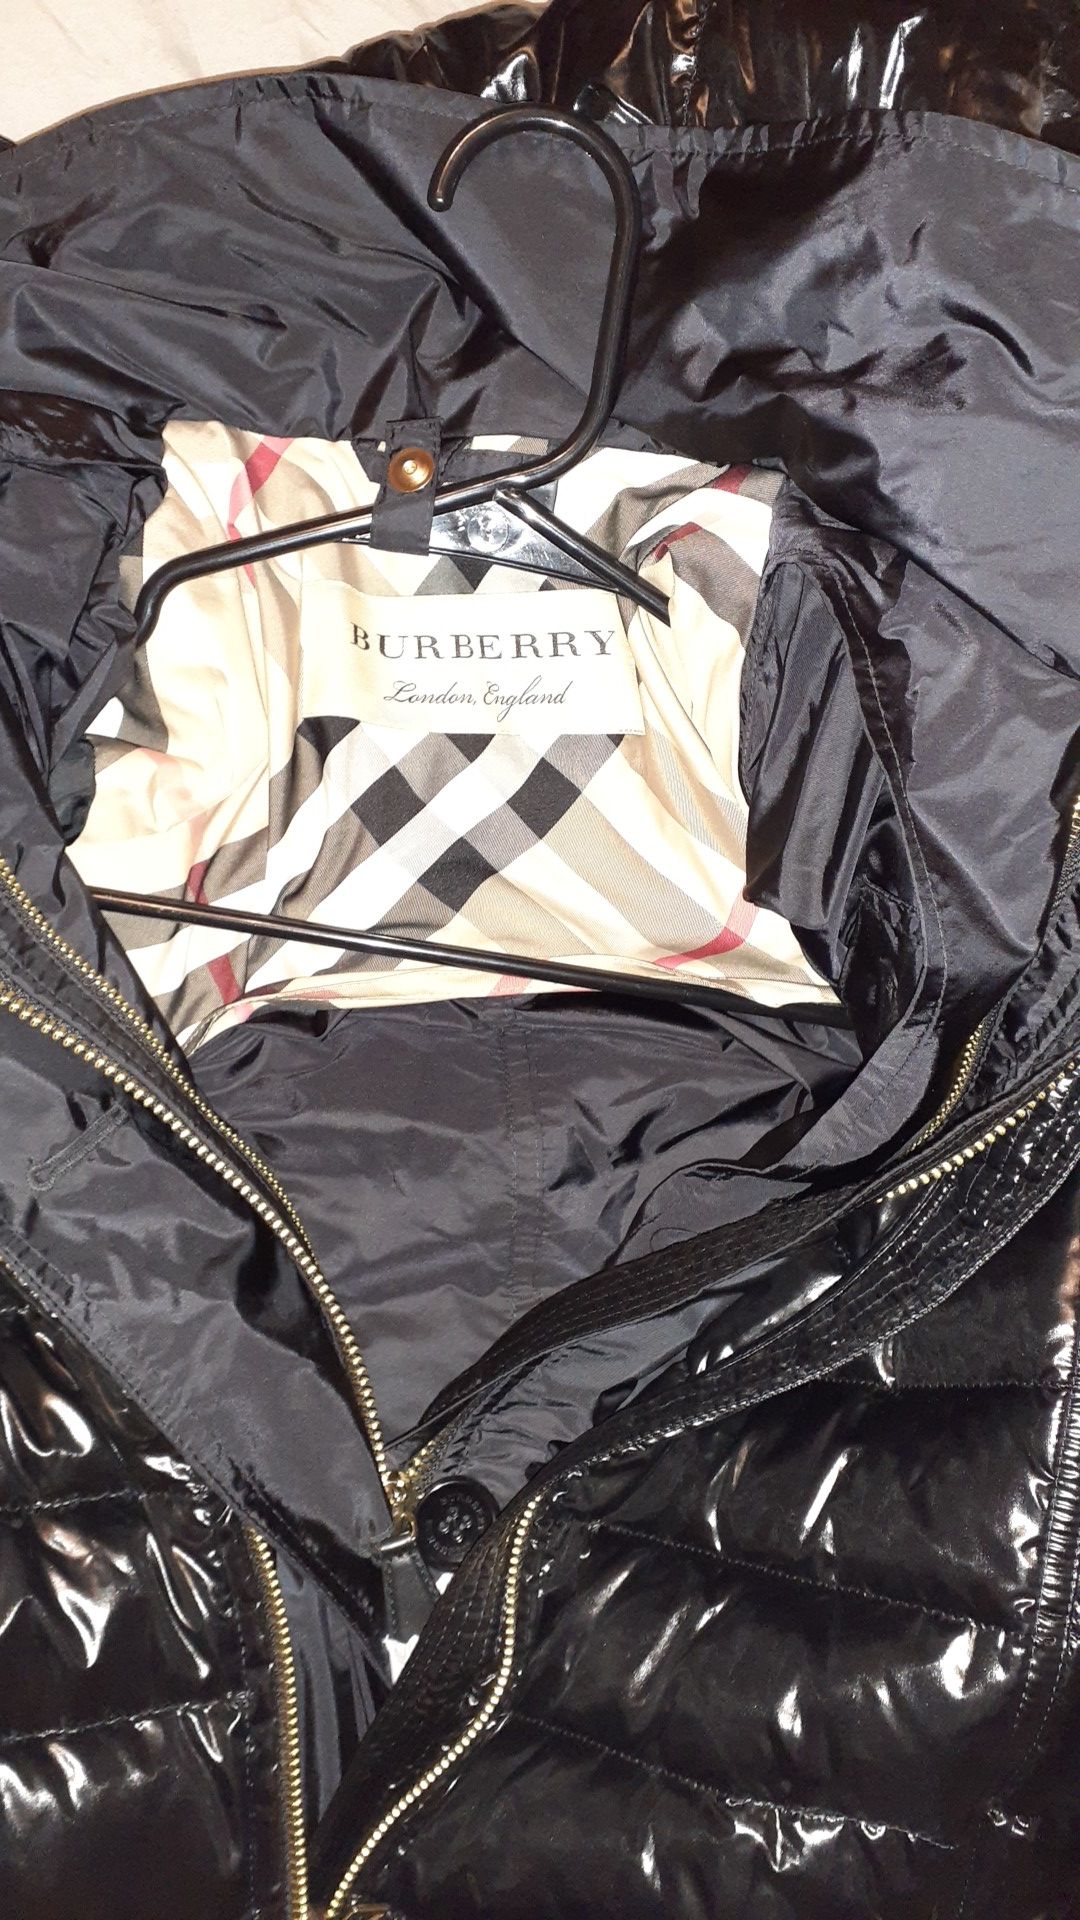 Burberry coat in a small